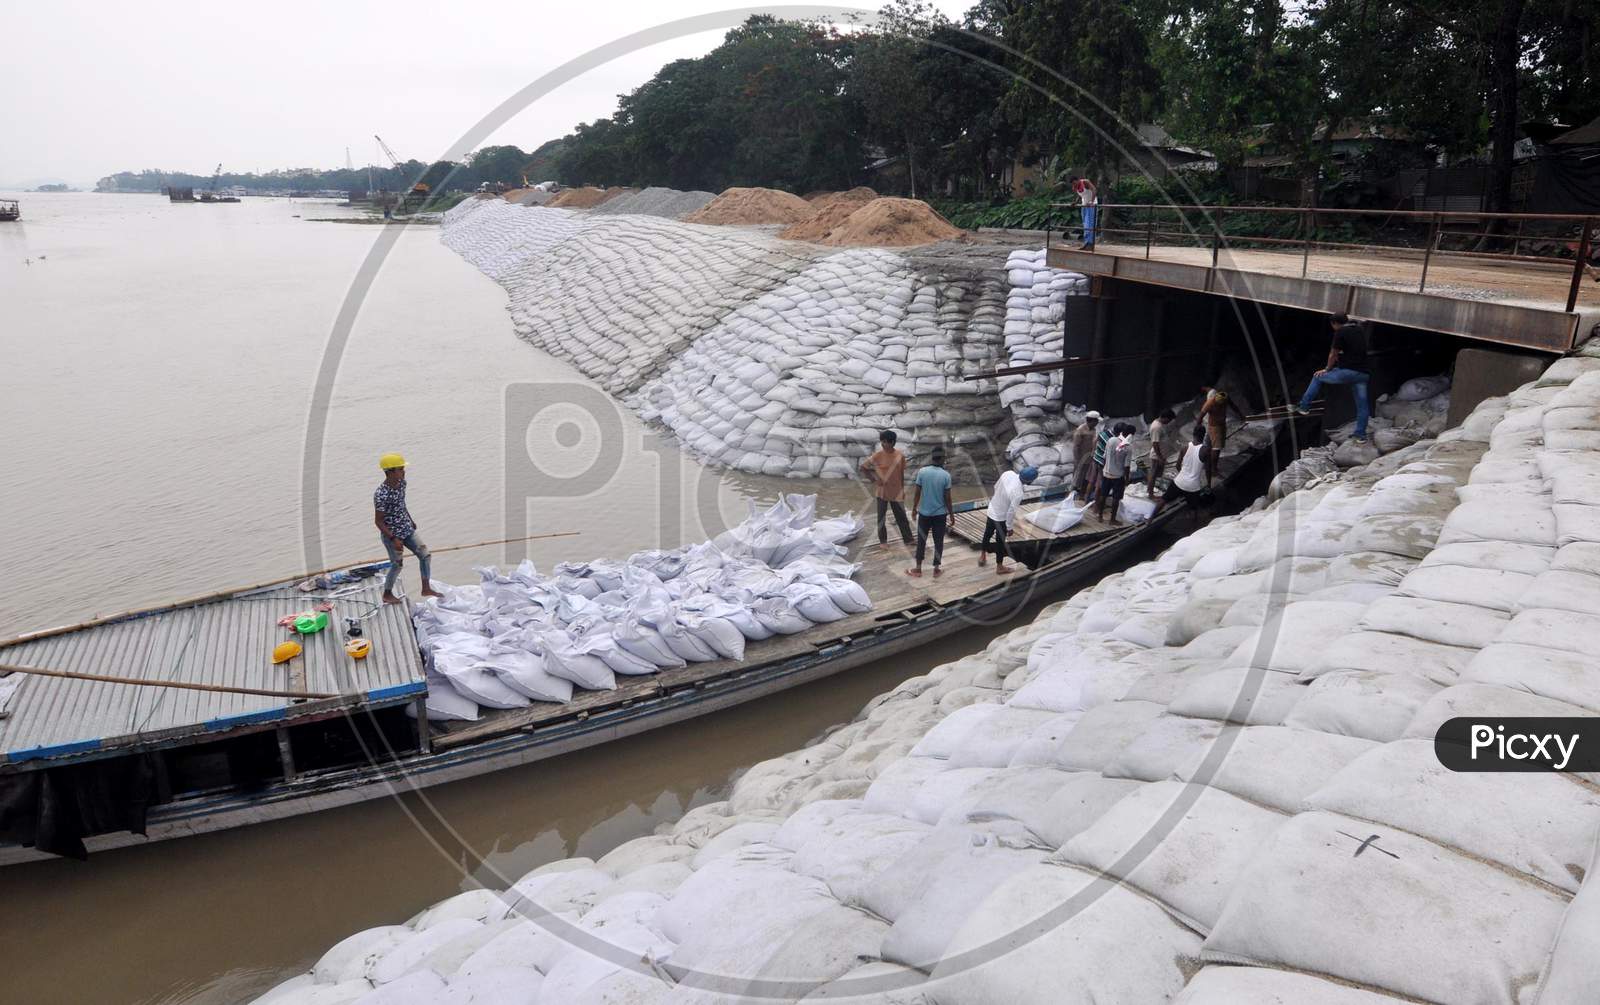 Workers Construct An Embankment Using Sandbags  To Prevent Erosion Along The Banks Of River Brahmaputra Ahead Of The Monsoon Season, In Guwahati, Sunday, May 24, 2020.